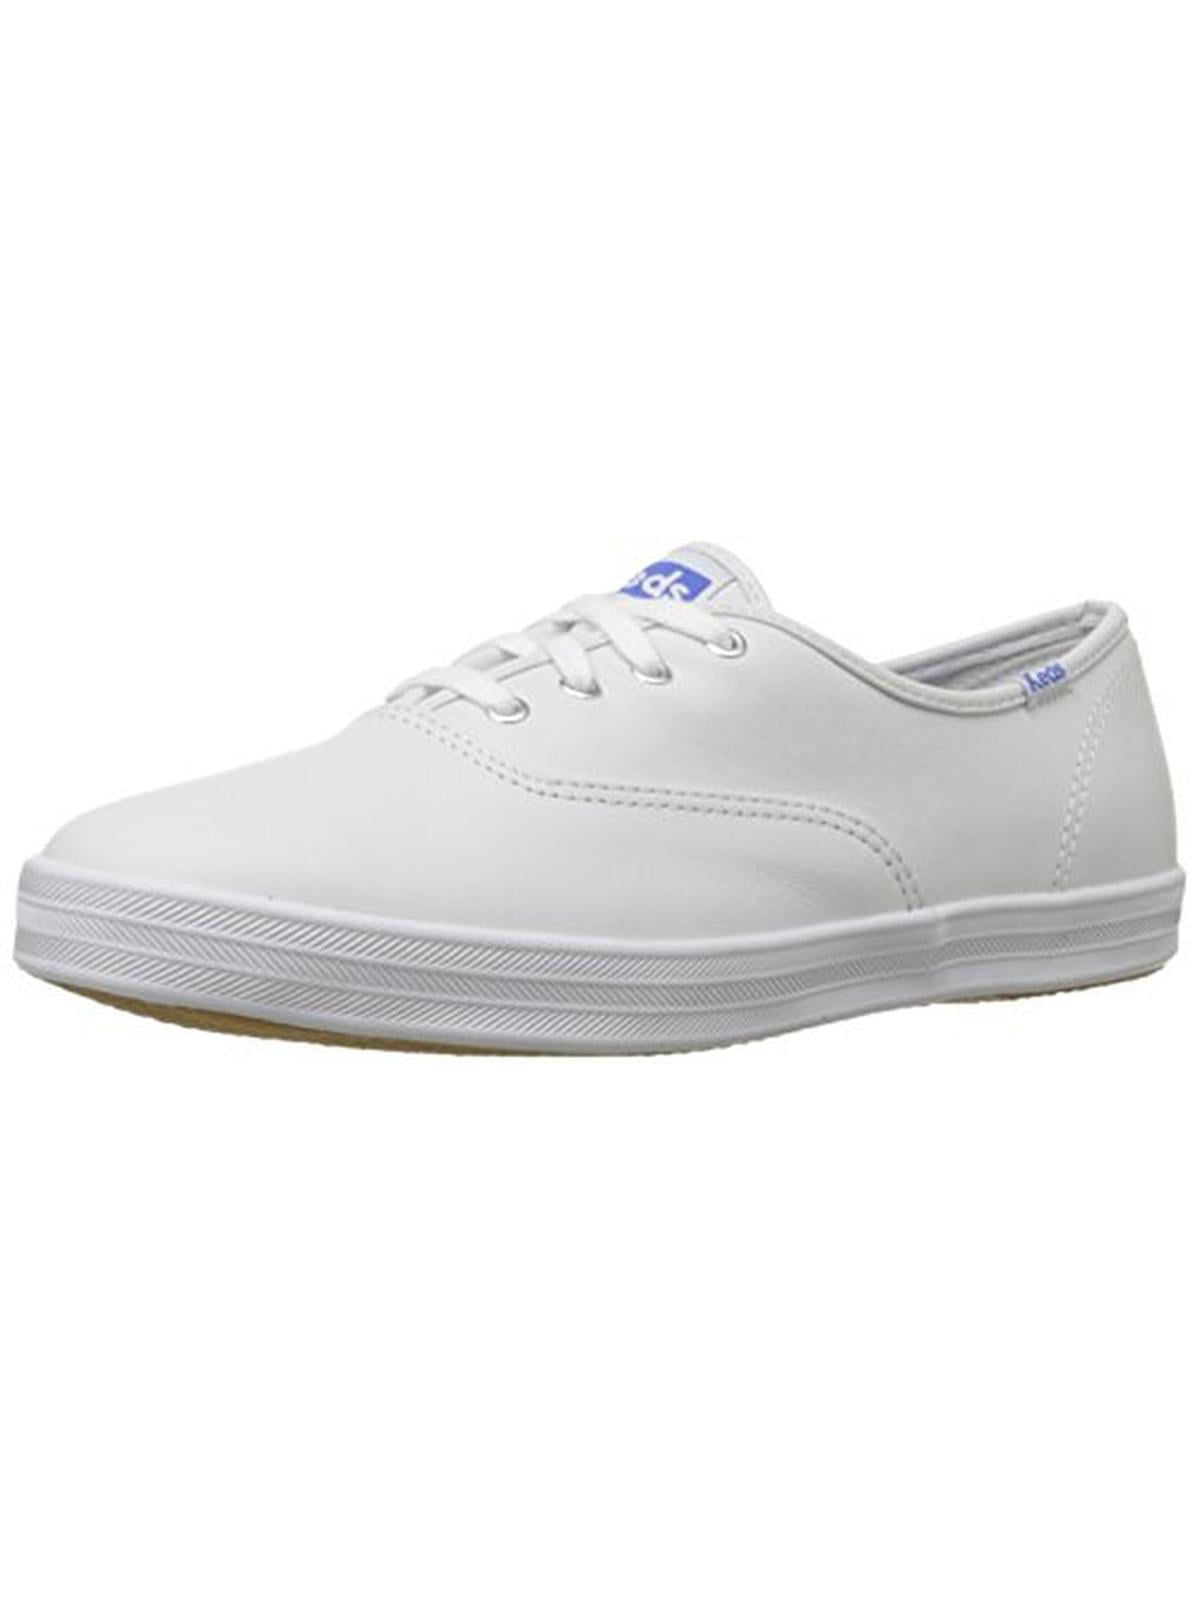 Keds - Keds Girls Champion Solid Leather Casual Shoes - Walmart.com ...